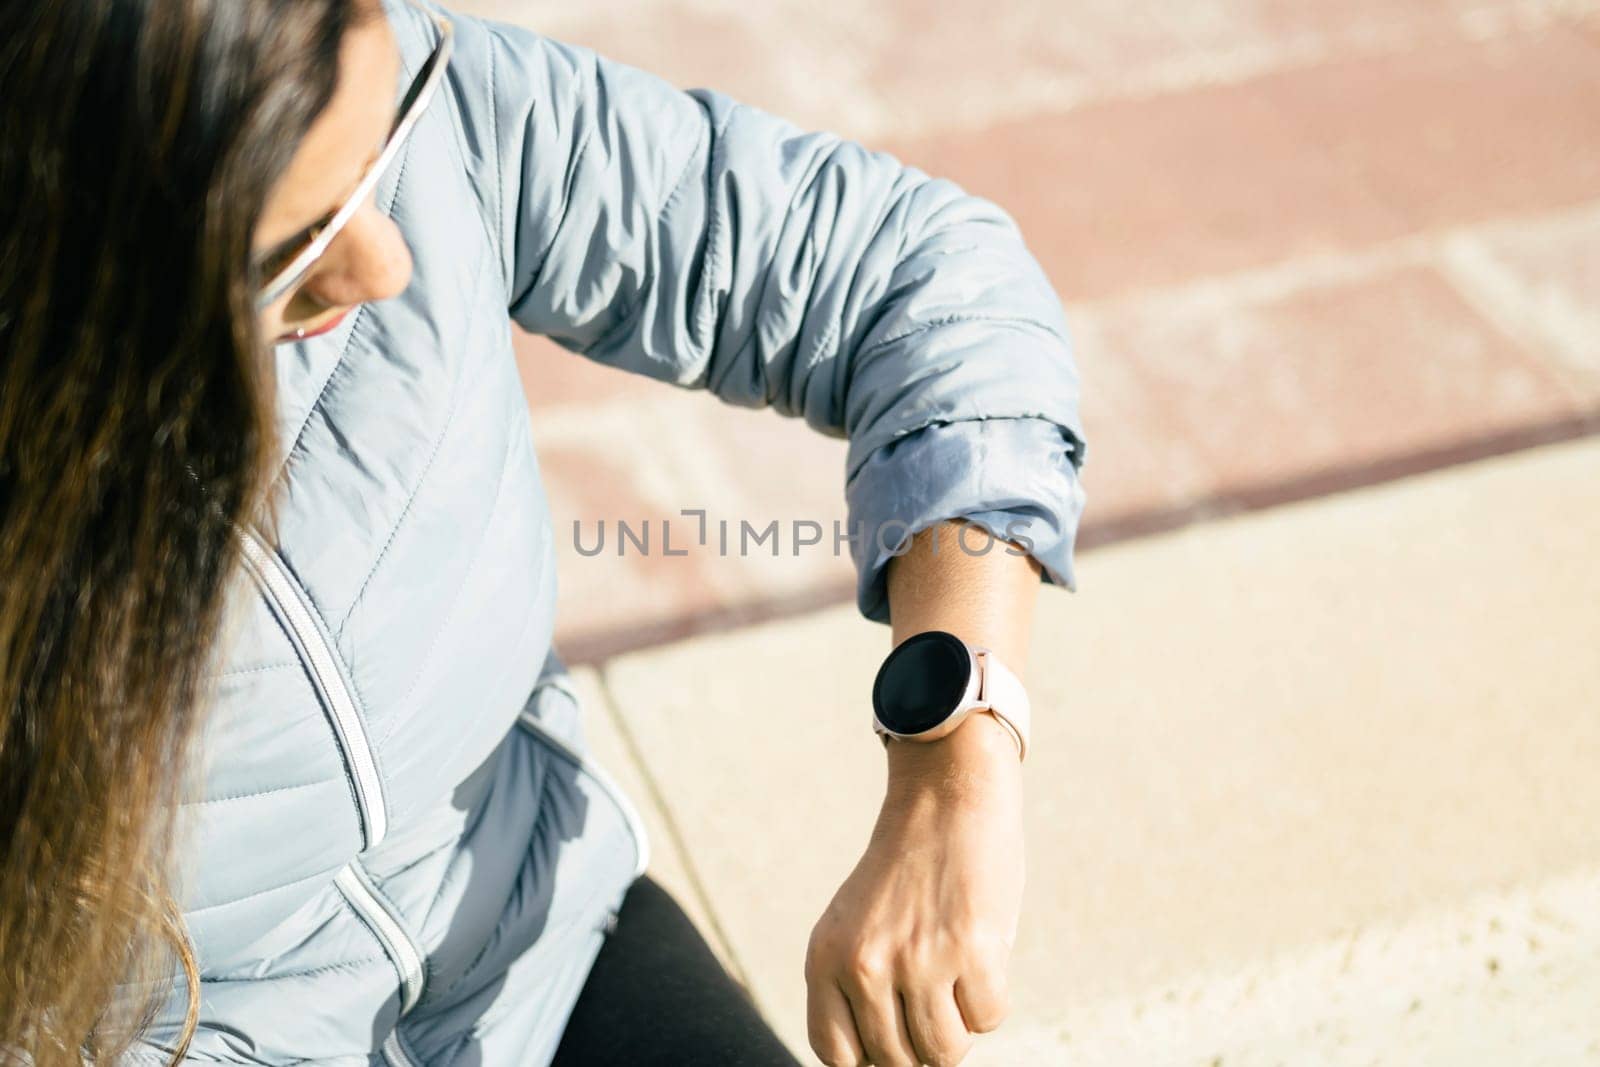 latin woman with long hair looking at smartwatch wearing sunglasses and blue jacket, wireless technology social media concept